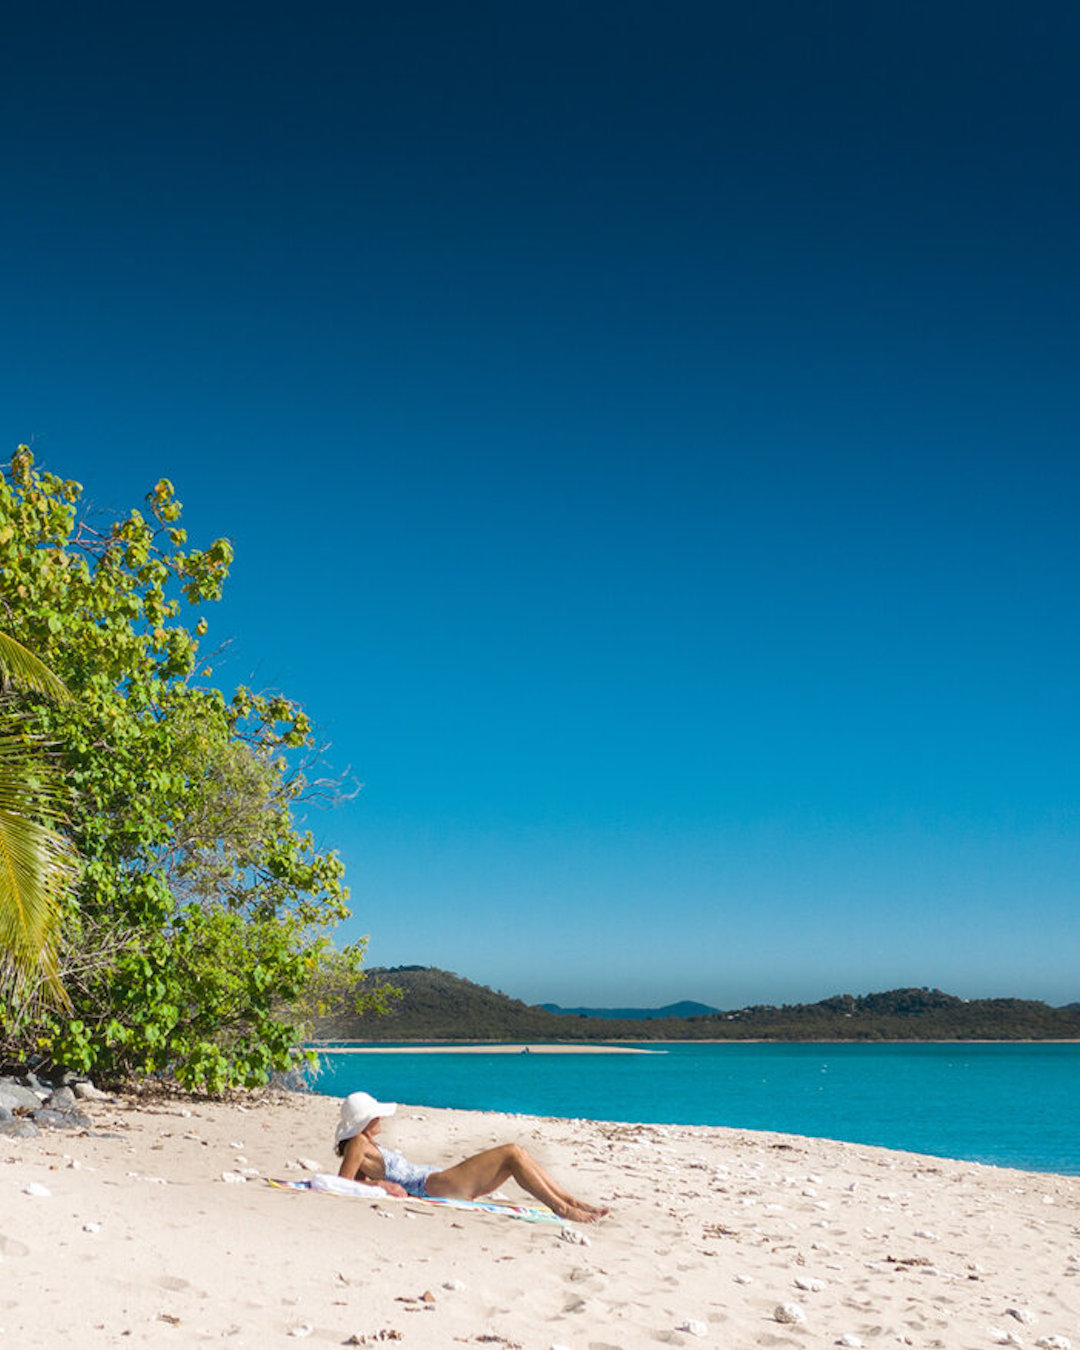 A woman sunbakes on a white sandy beach on Victor Island overlooking clear blue water.